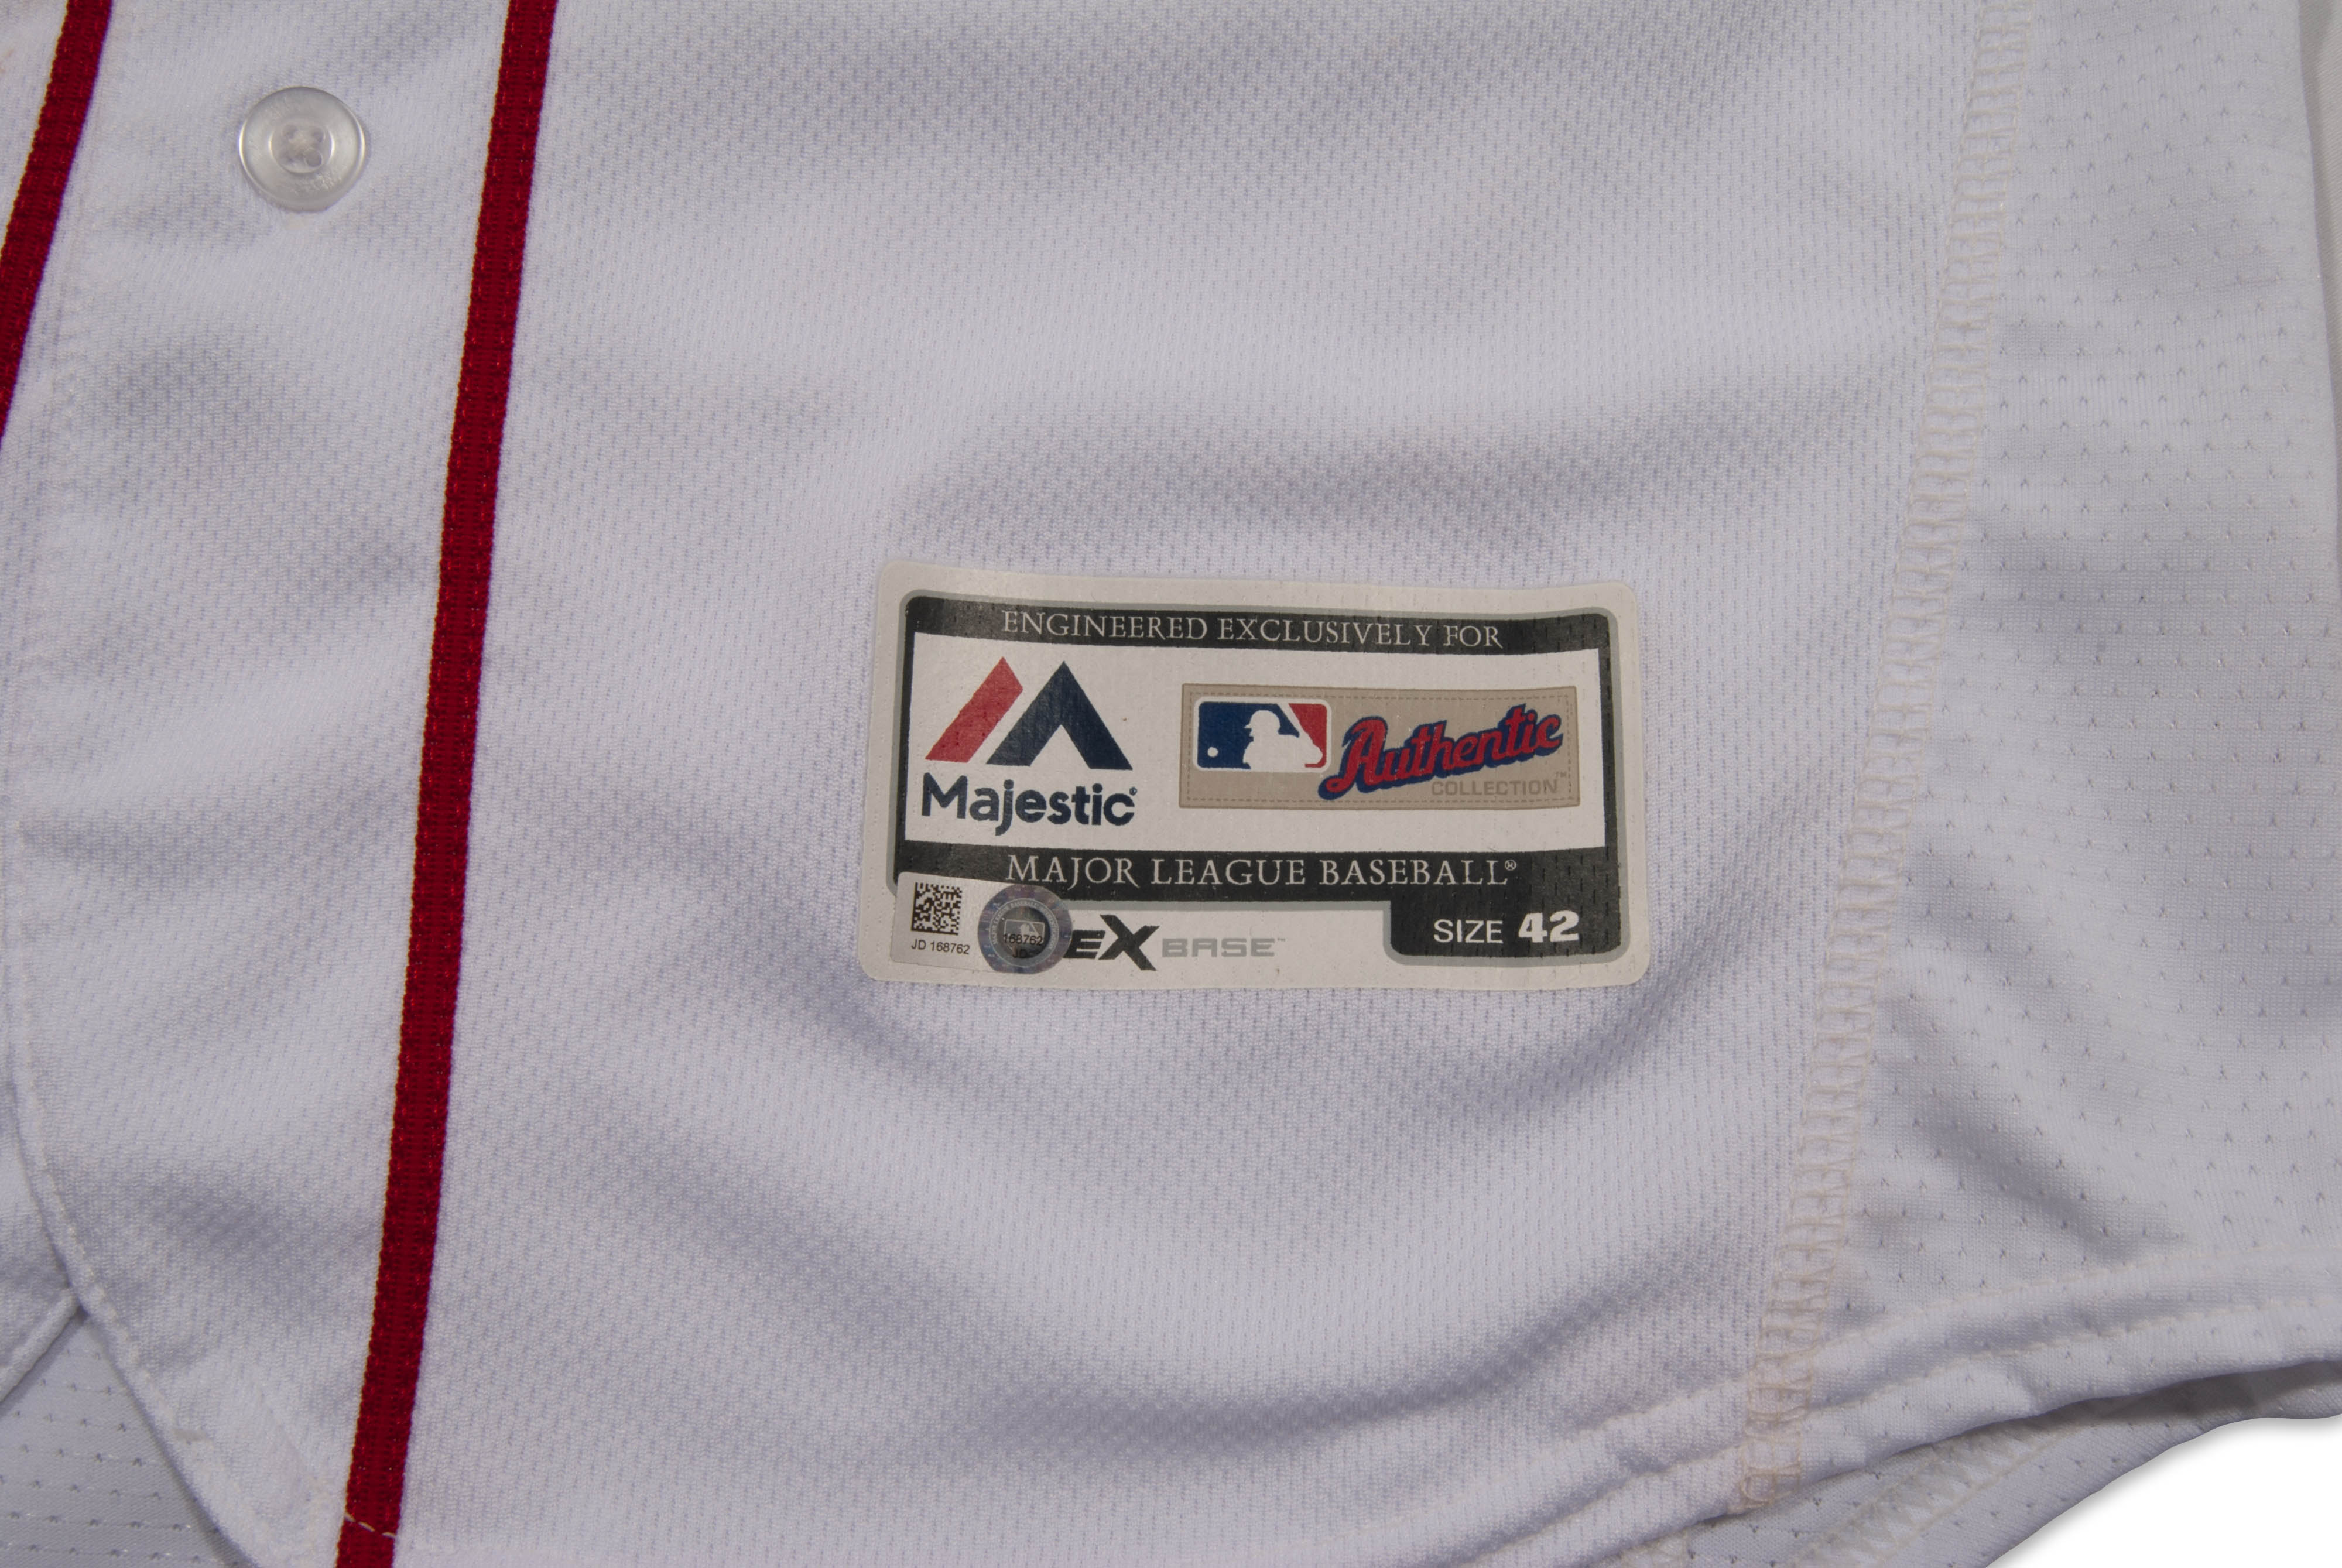 Mookie Betts Authentic Game Used Jersey vs Padres - Size 42